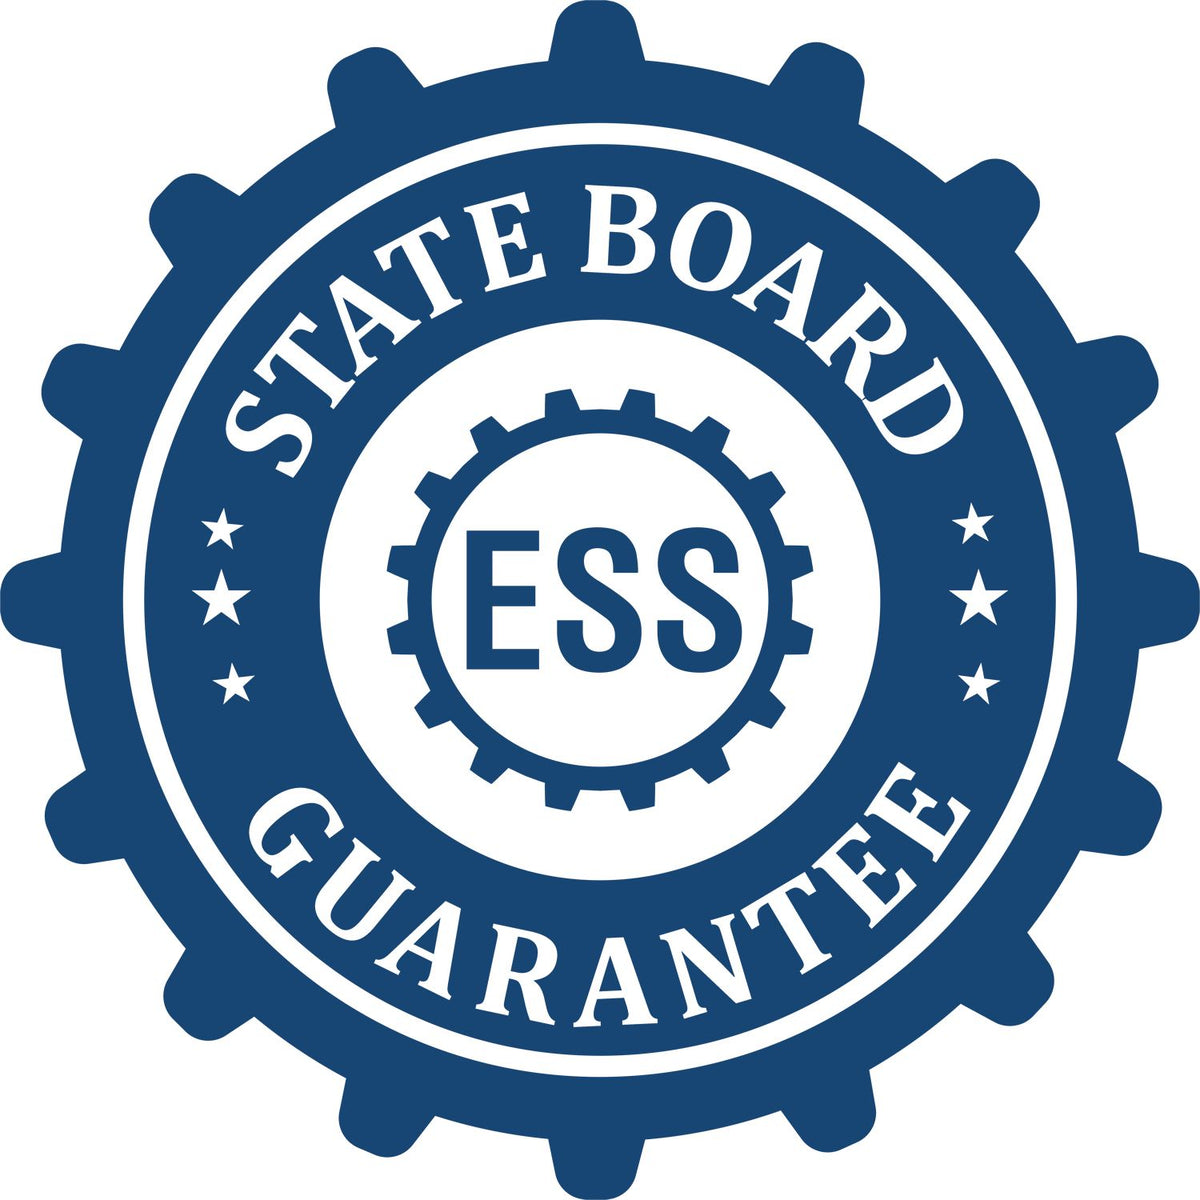 An emblem in a gear shape illustrating a state board guarantee for the Hybrid Pennsylvania Land Surveyor Seal